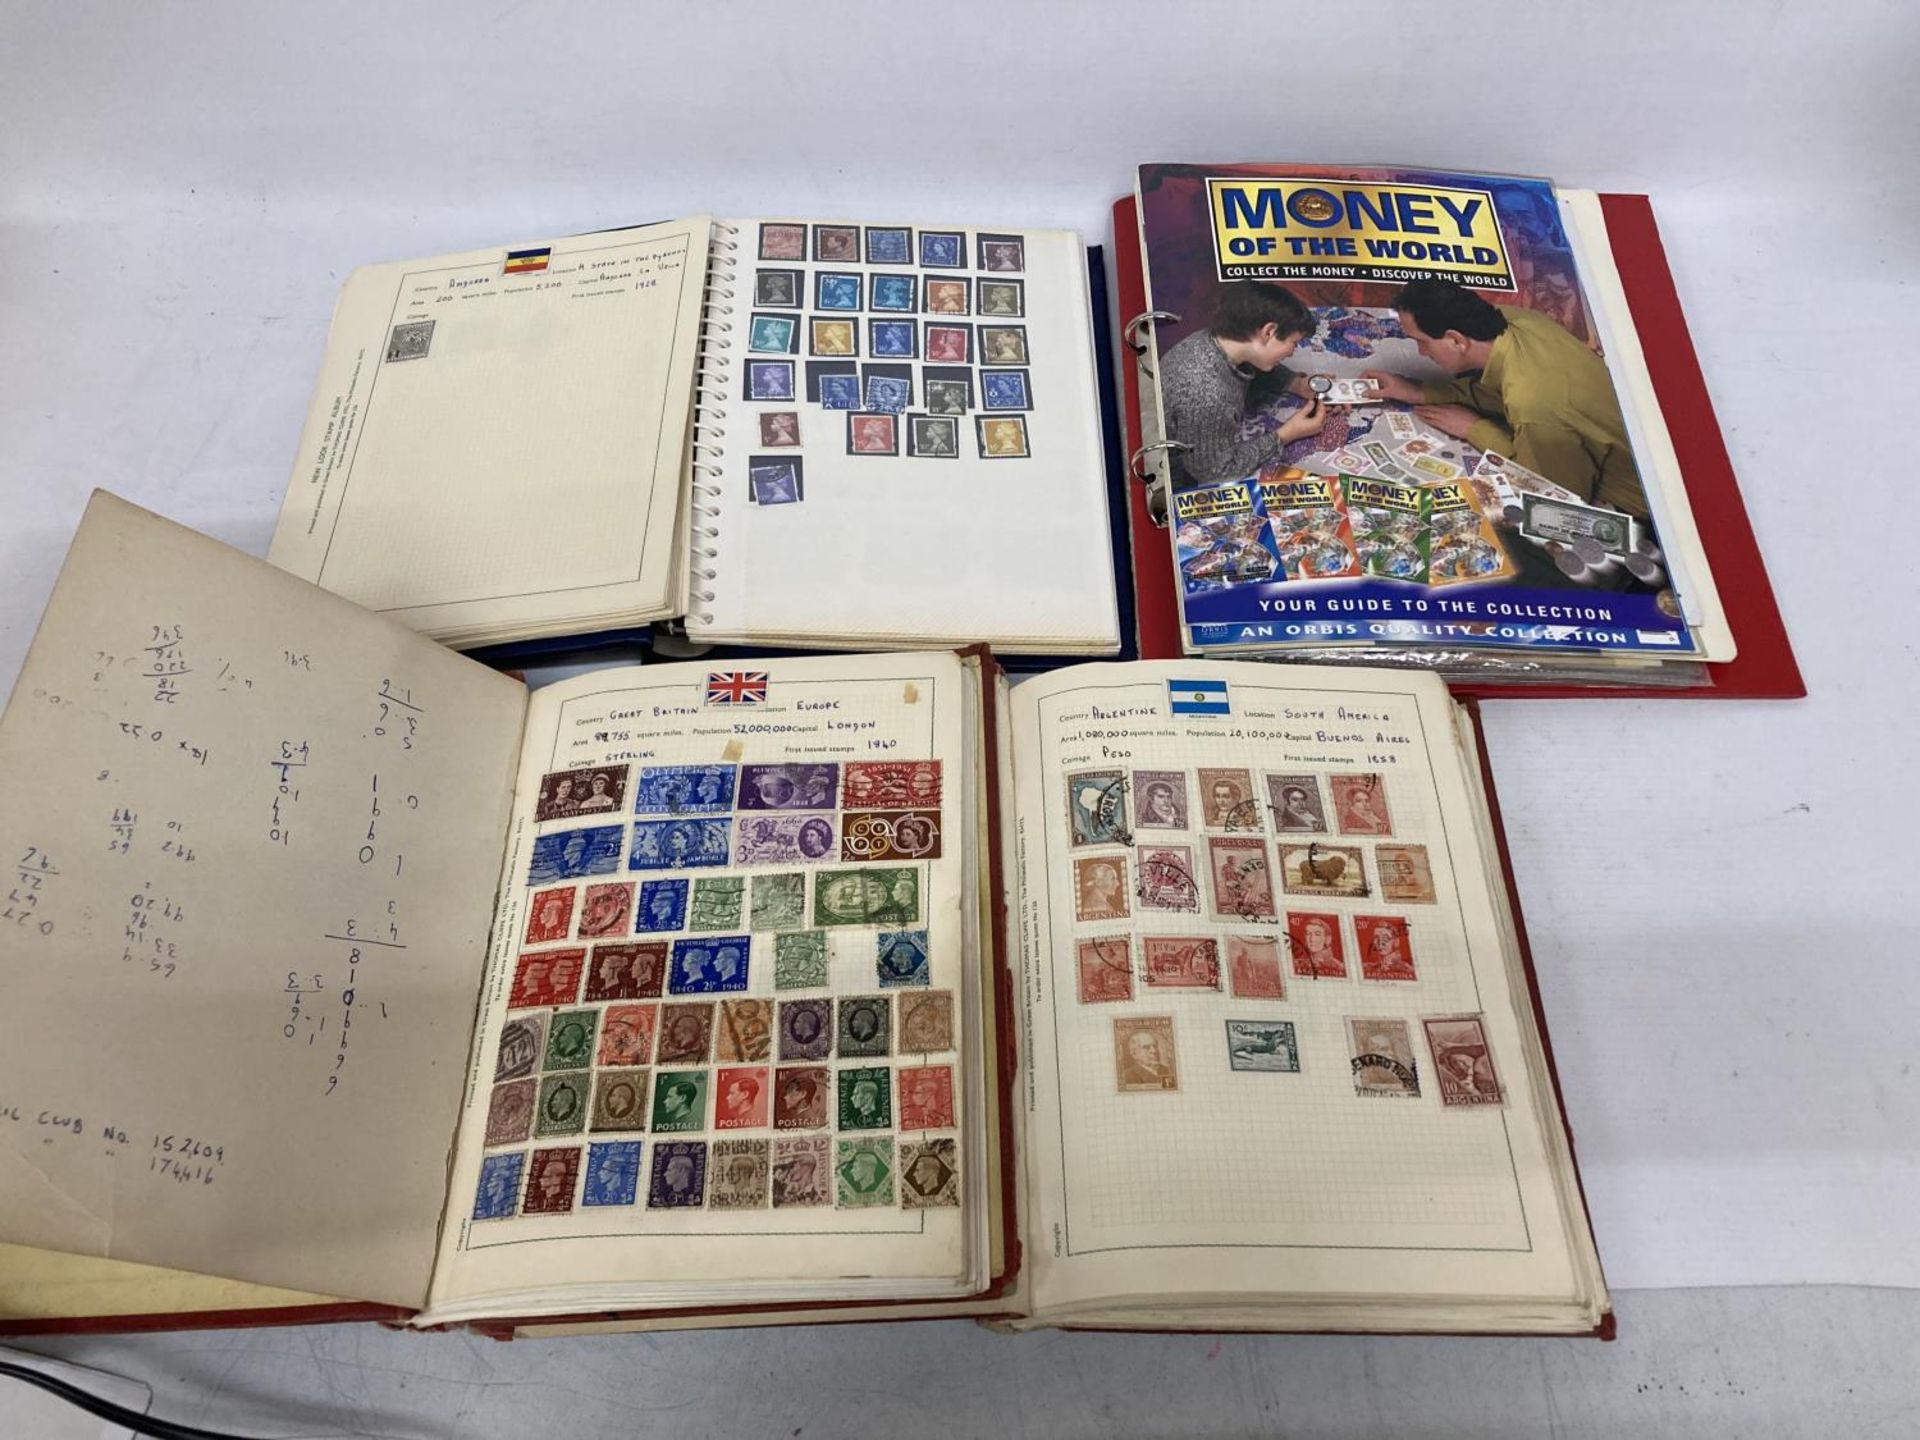 SMALL BOX CONTAINING 3 ALBUMS OF STAMPS PLUS AN ALBUM OF BANKNOTES ( UK £11 + 10/- NOTE ) AND STAMPS